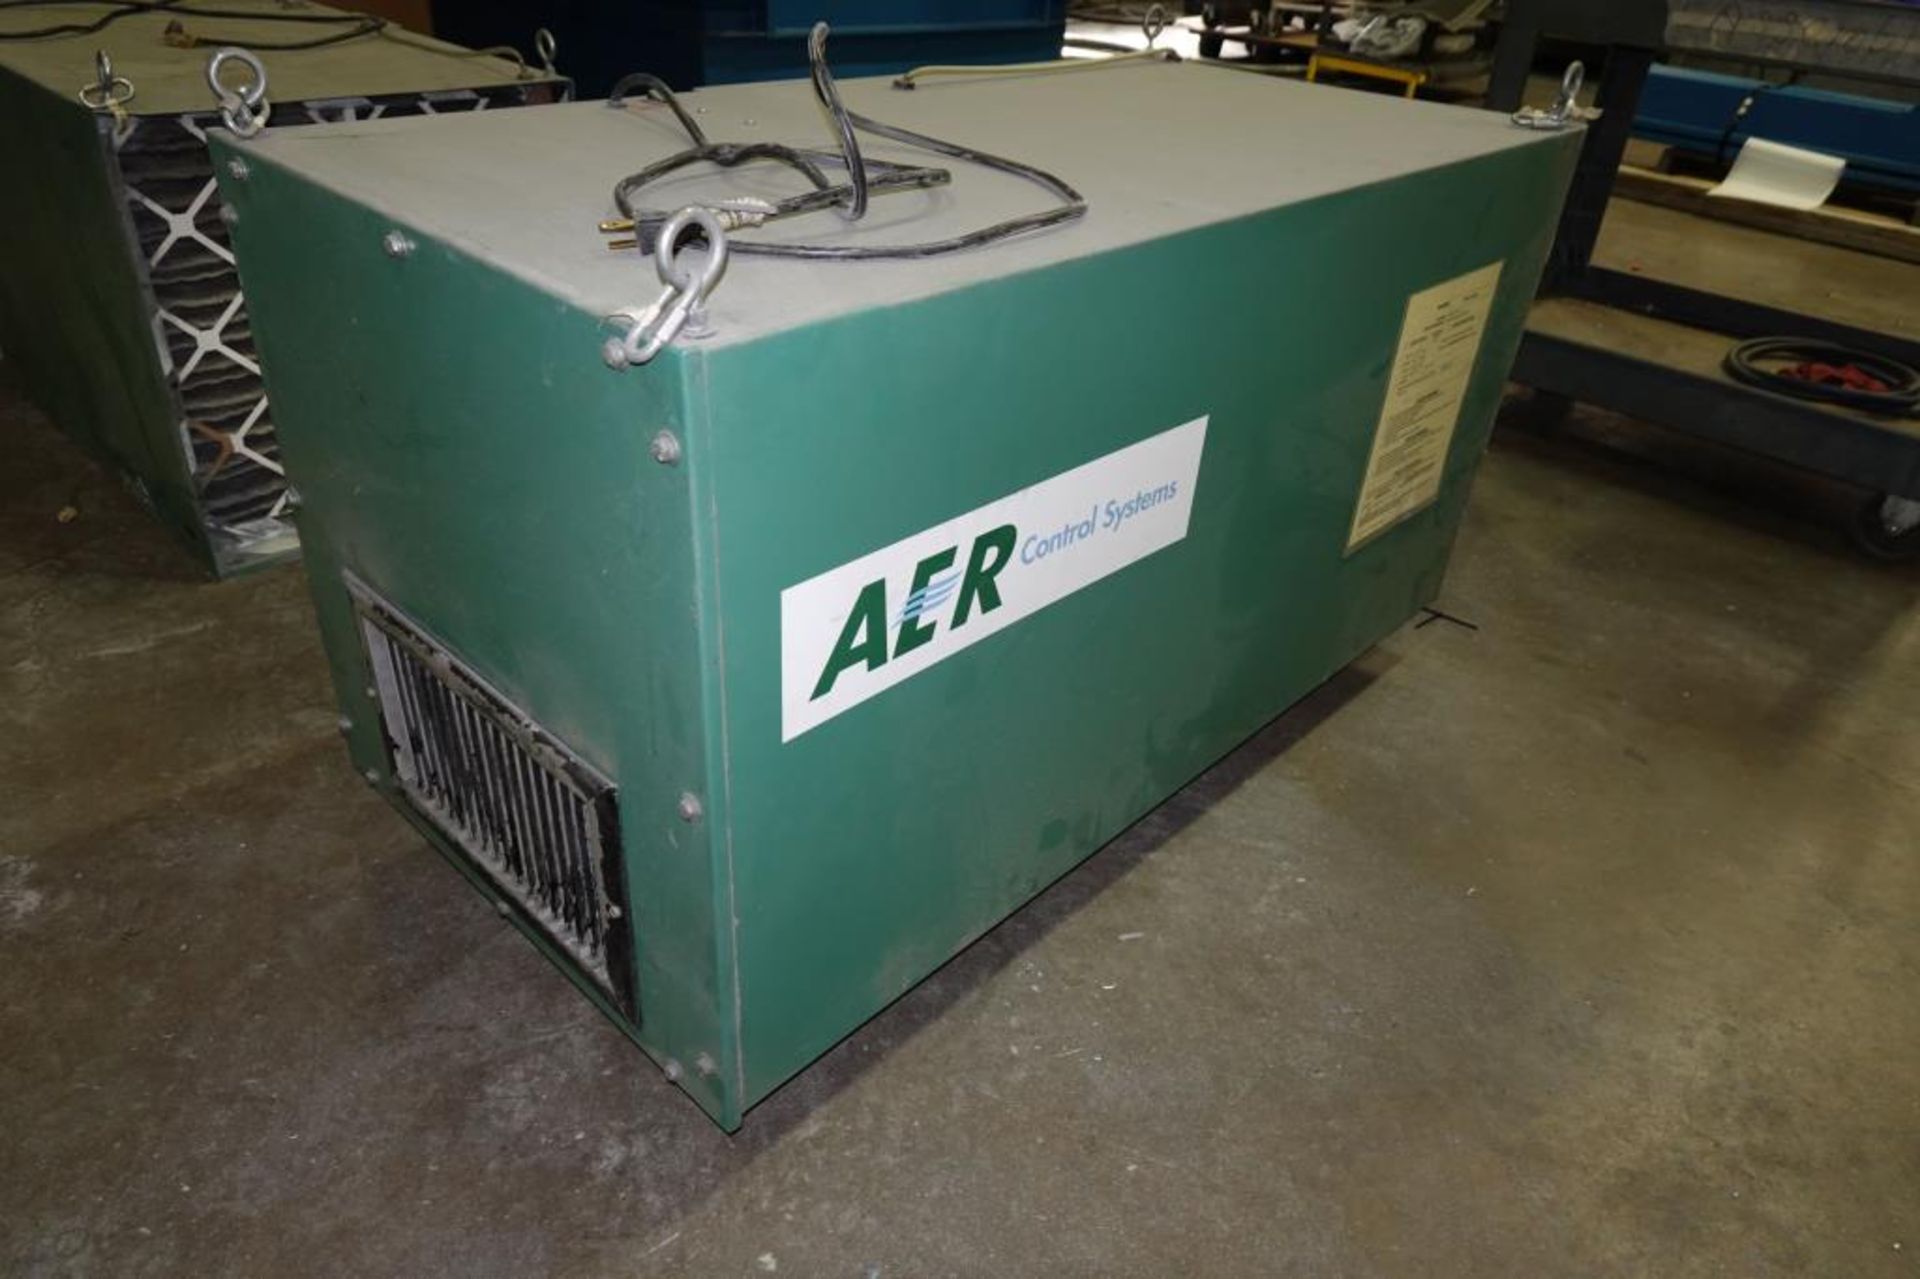 AER Control Systems Commercial Dust Collector Air Cleaner - Image 3 of 4